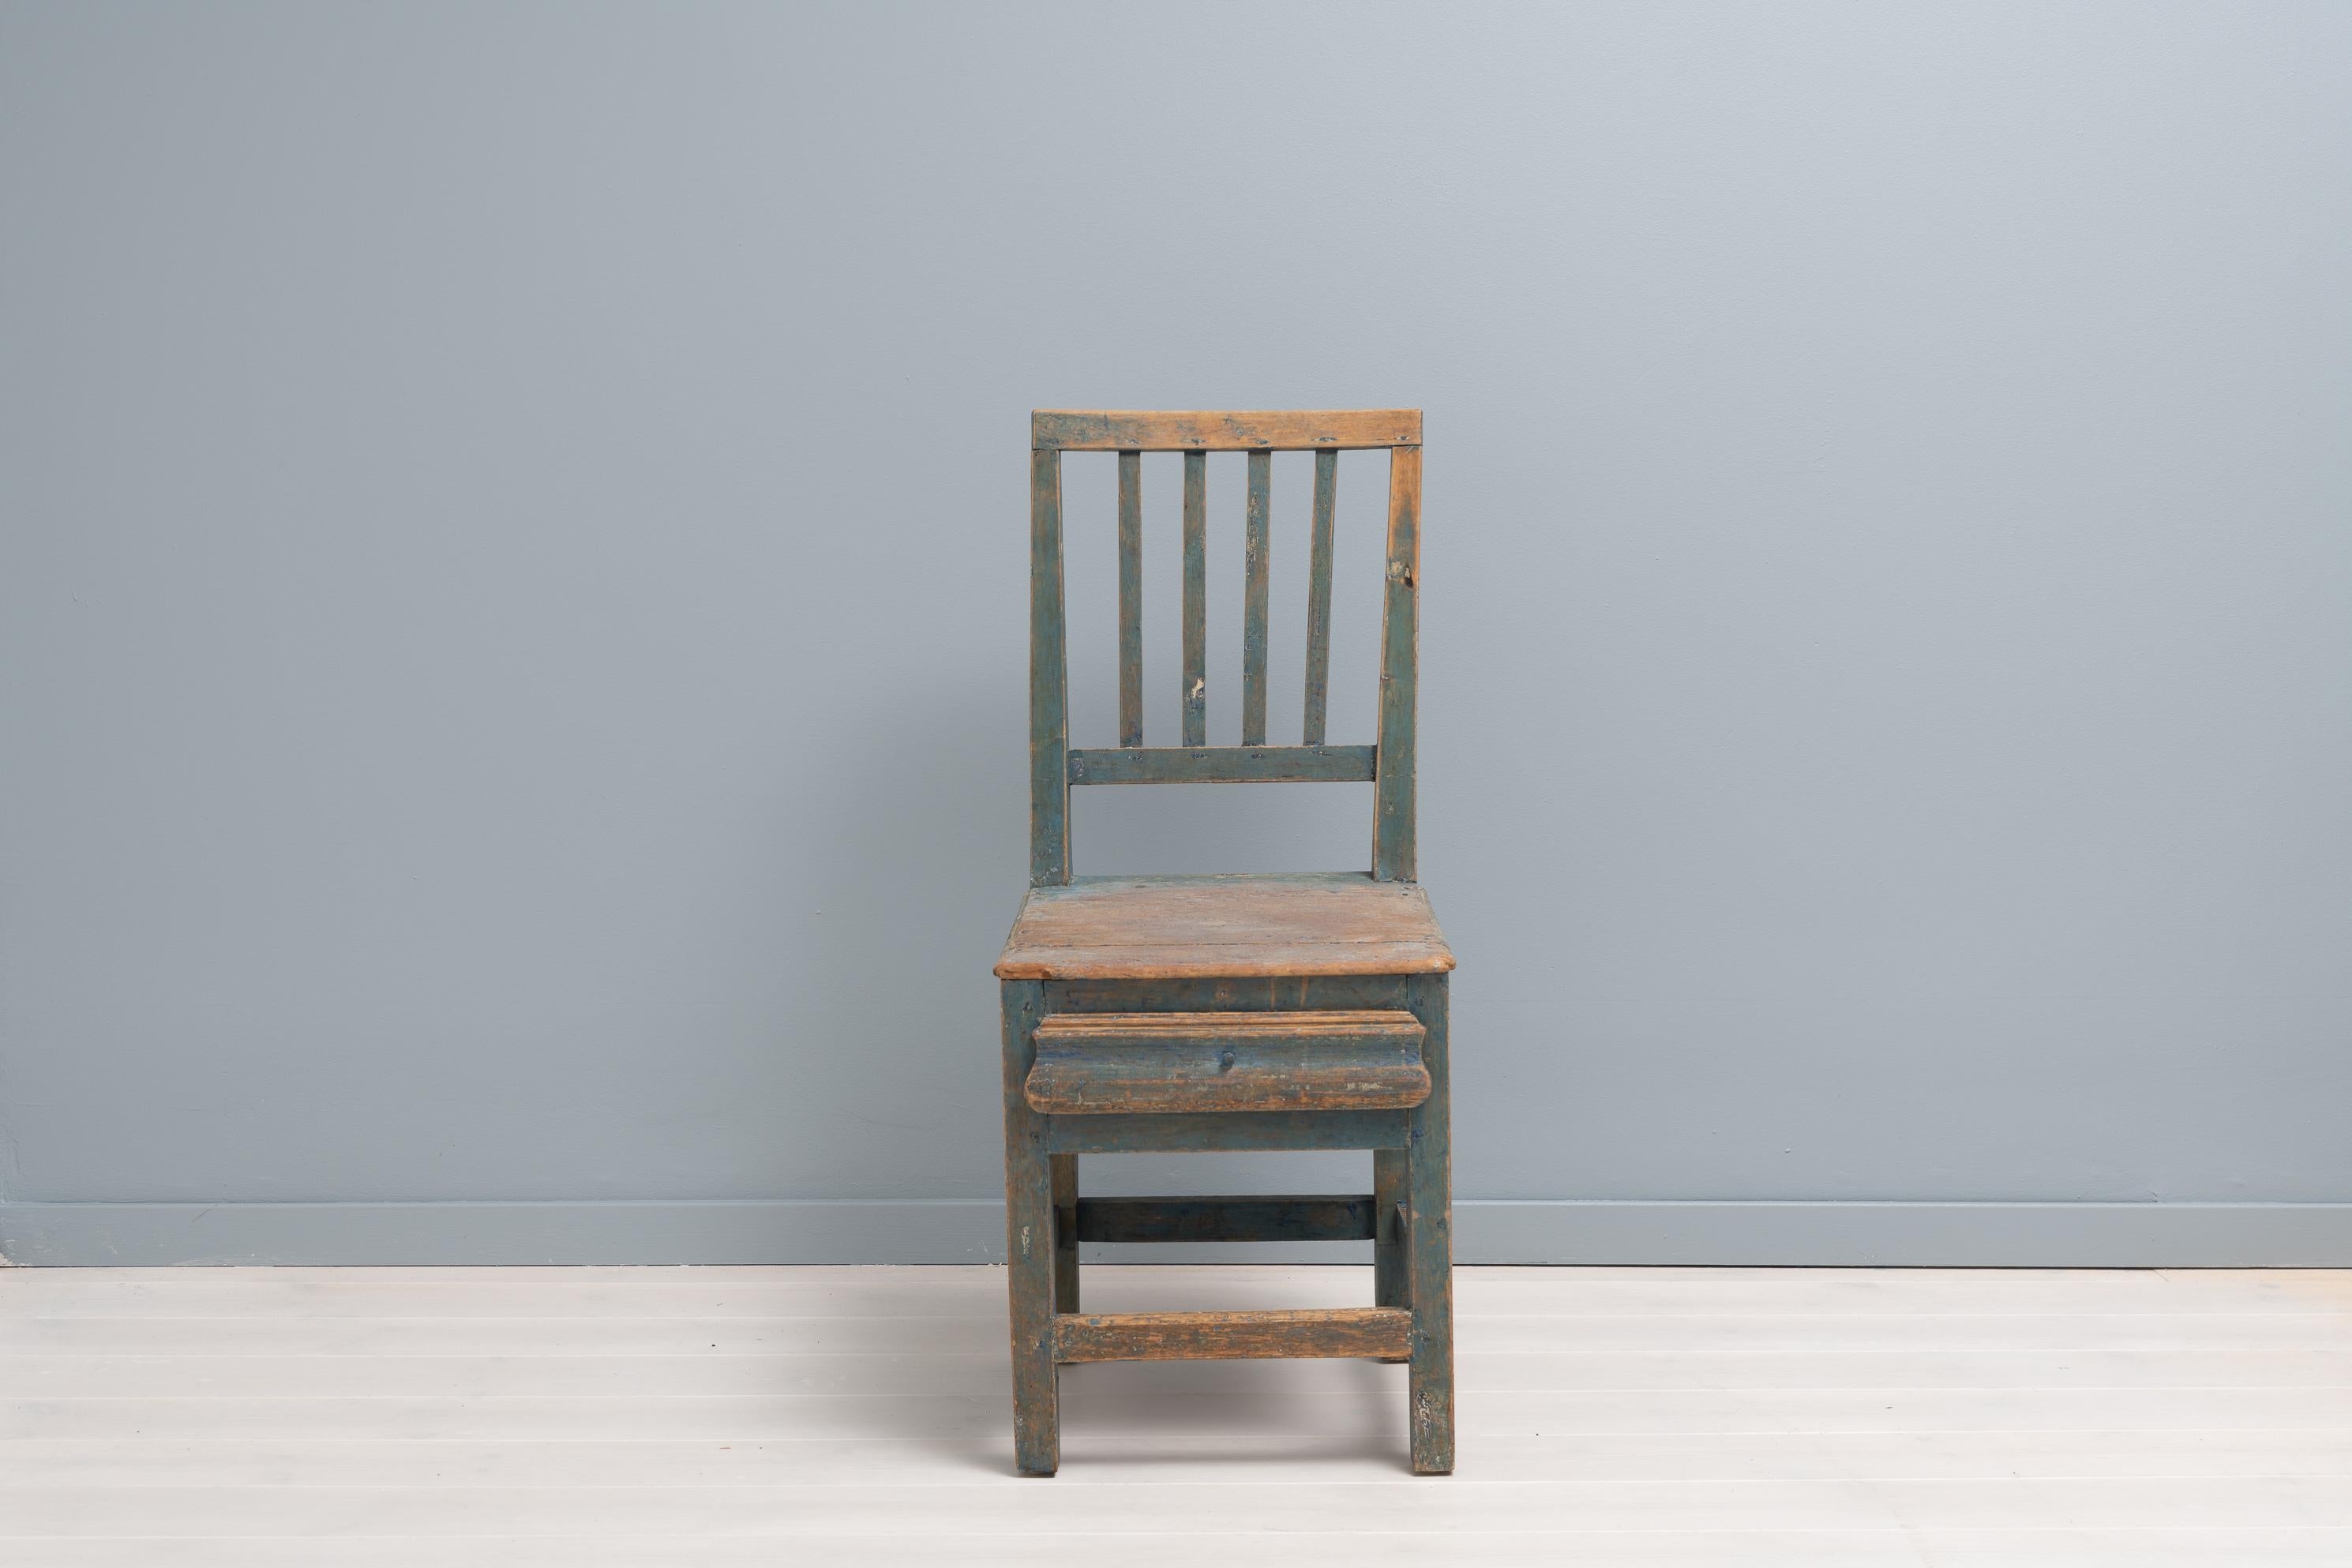 Blue Folk Art chair in Gustavian style from the mid 1800s. The chair is from Northern Sweden and has the original blue paint. The paint has some distress and patina so the wood underneath shines trough. The chair would work well as for example a